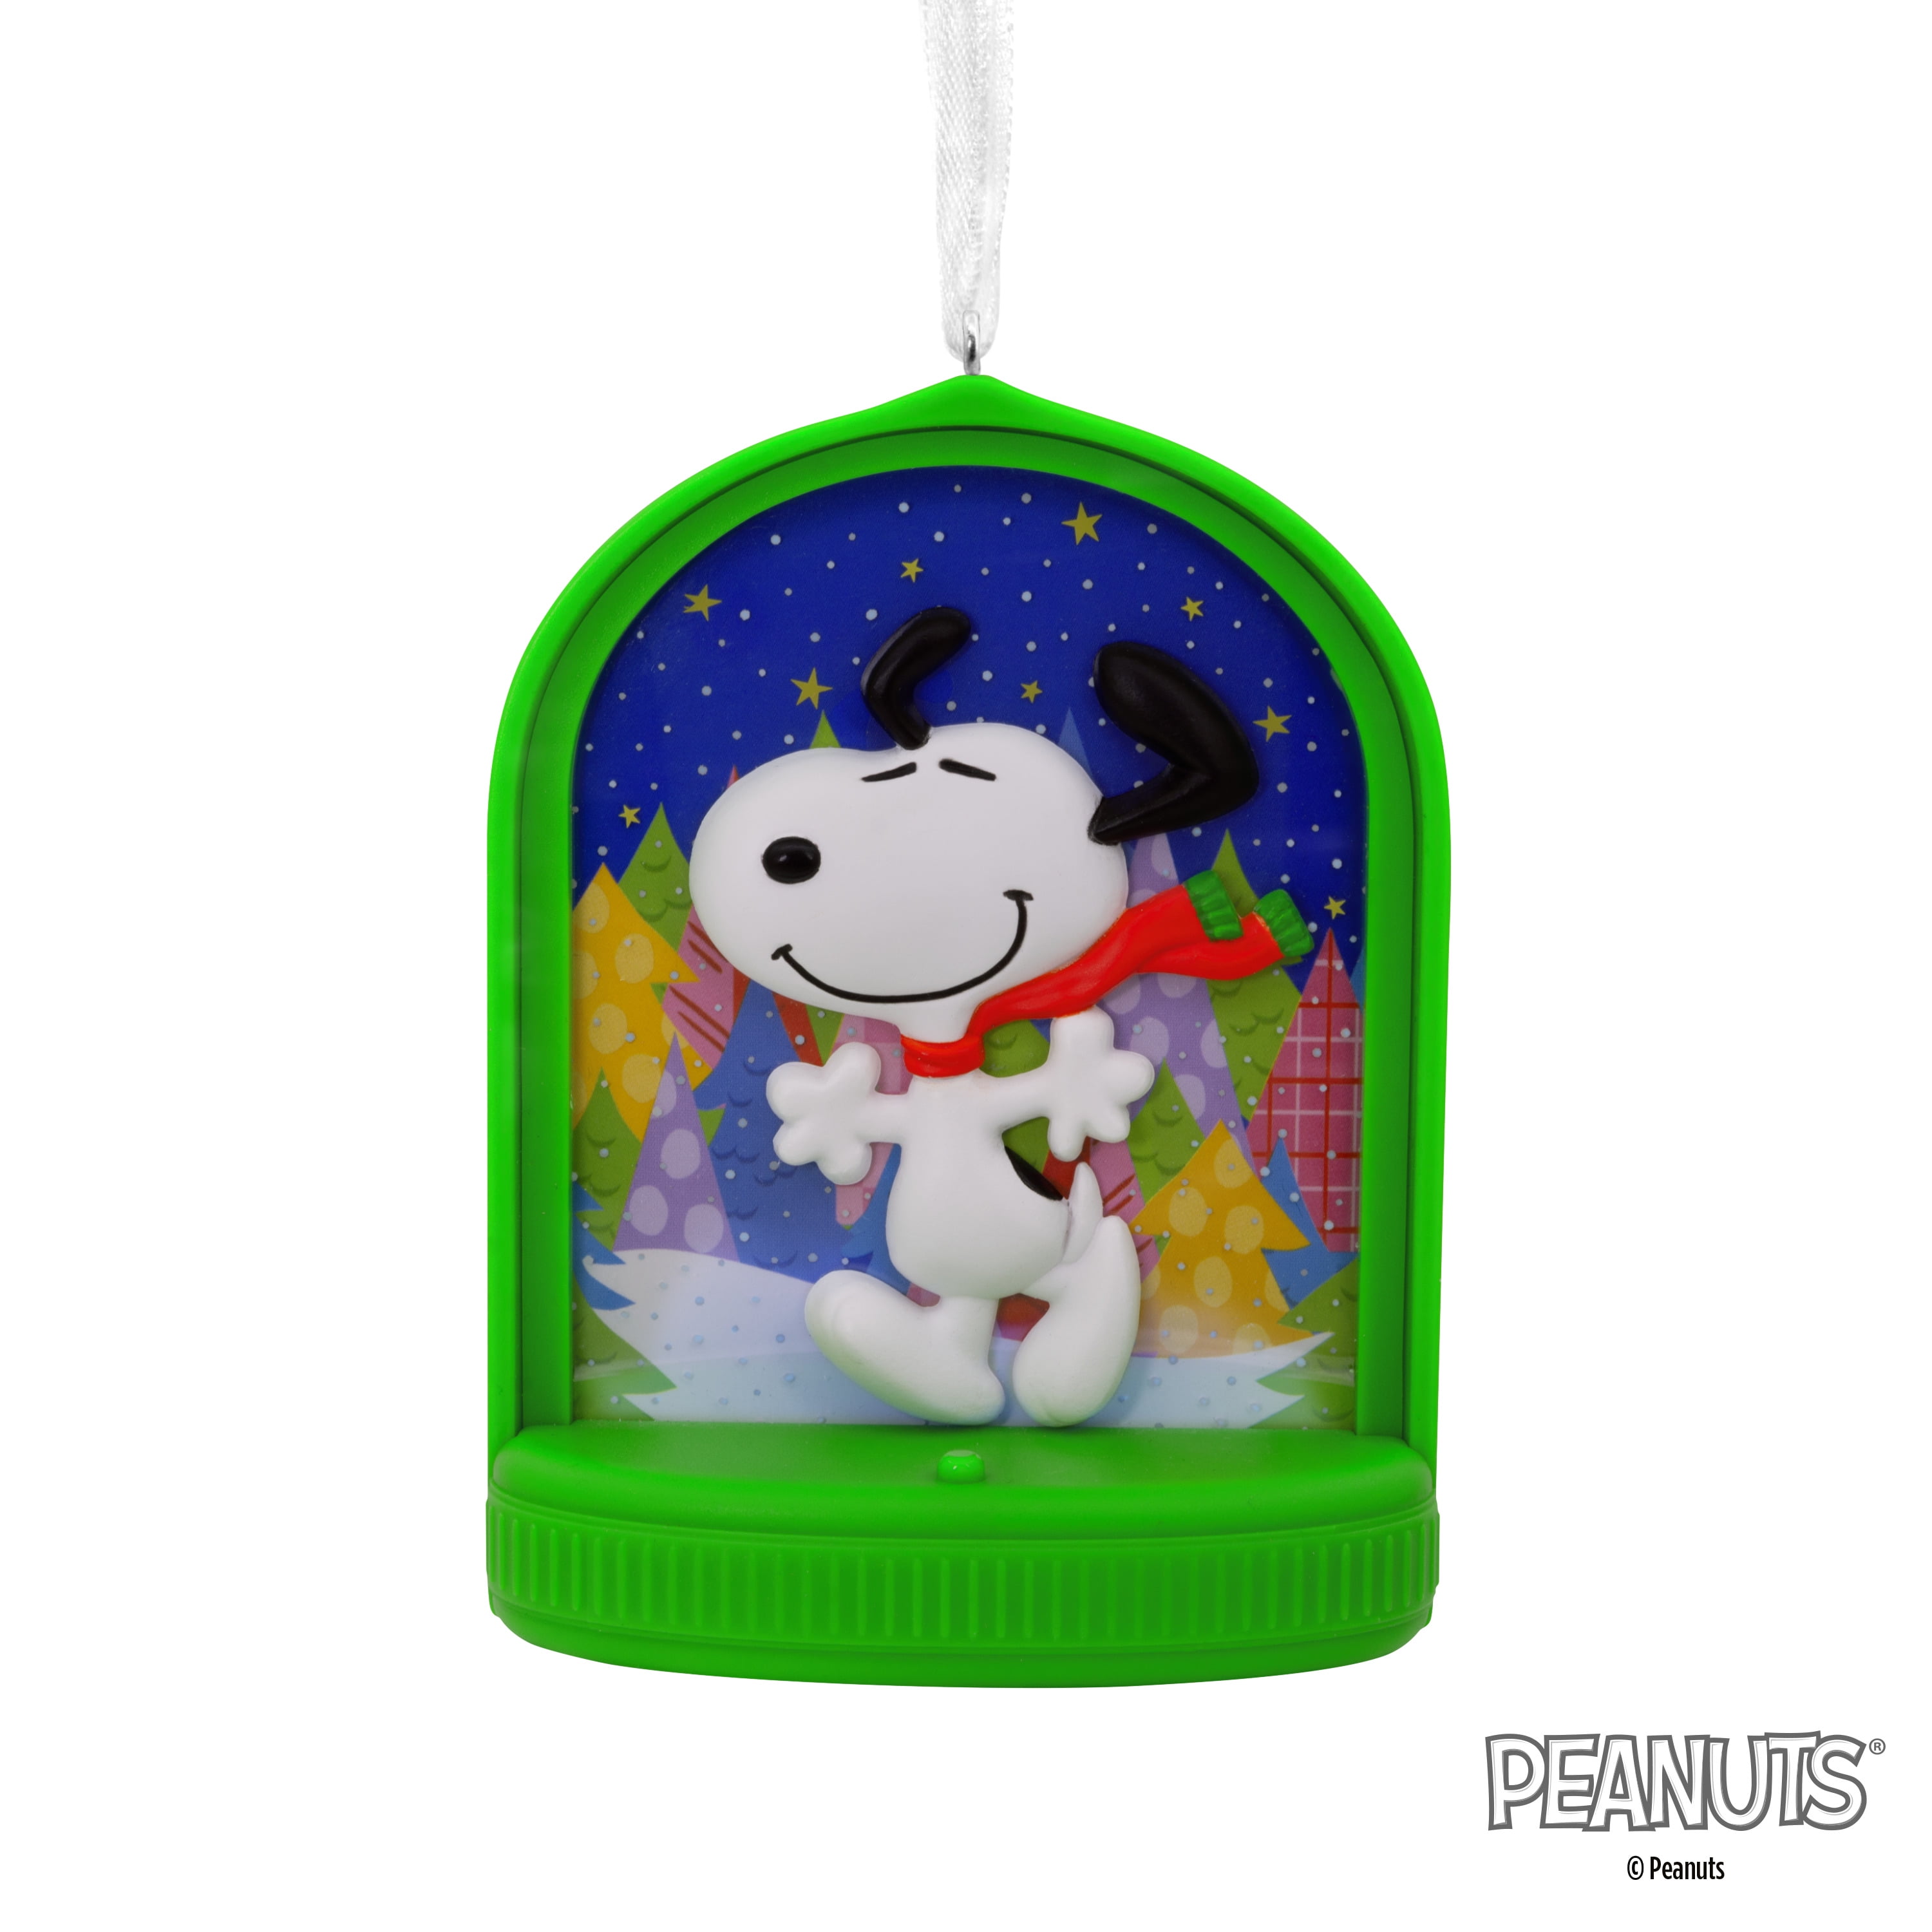 2020 RED Box Christmas Ornament Hall Mark Snoopy for President Peanuts